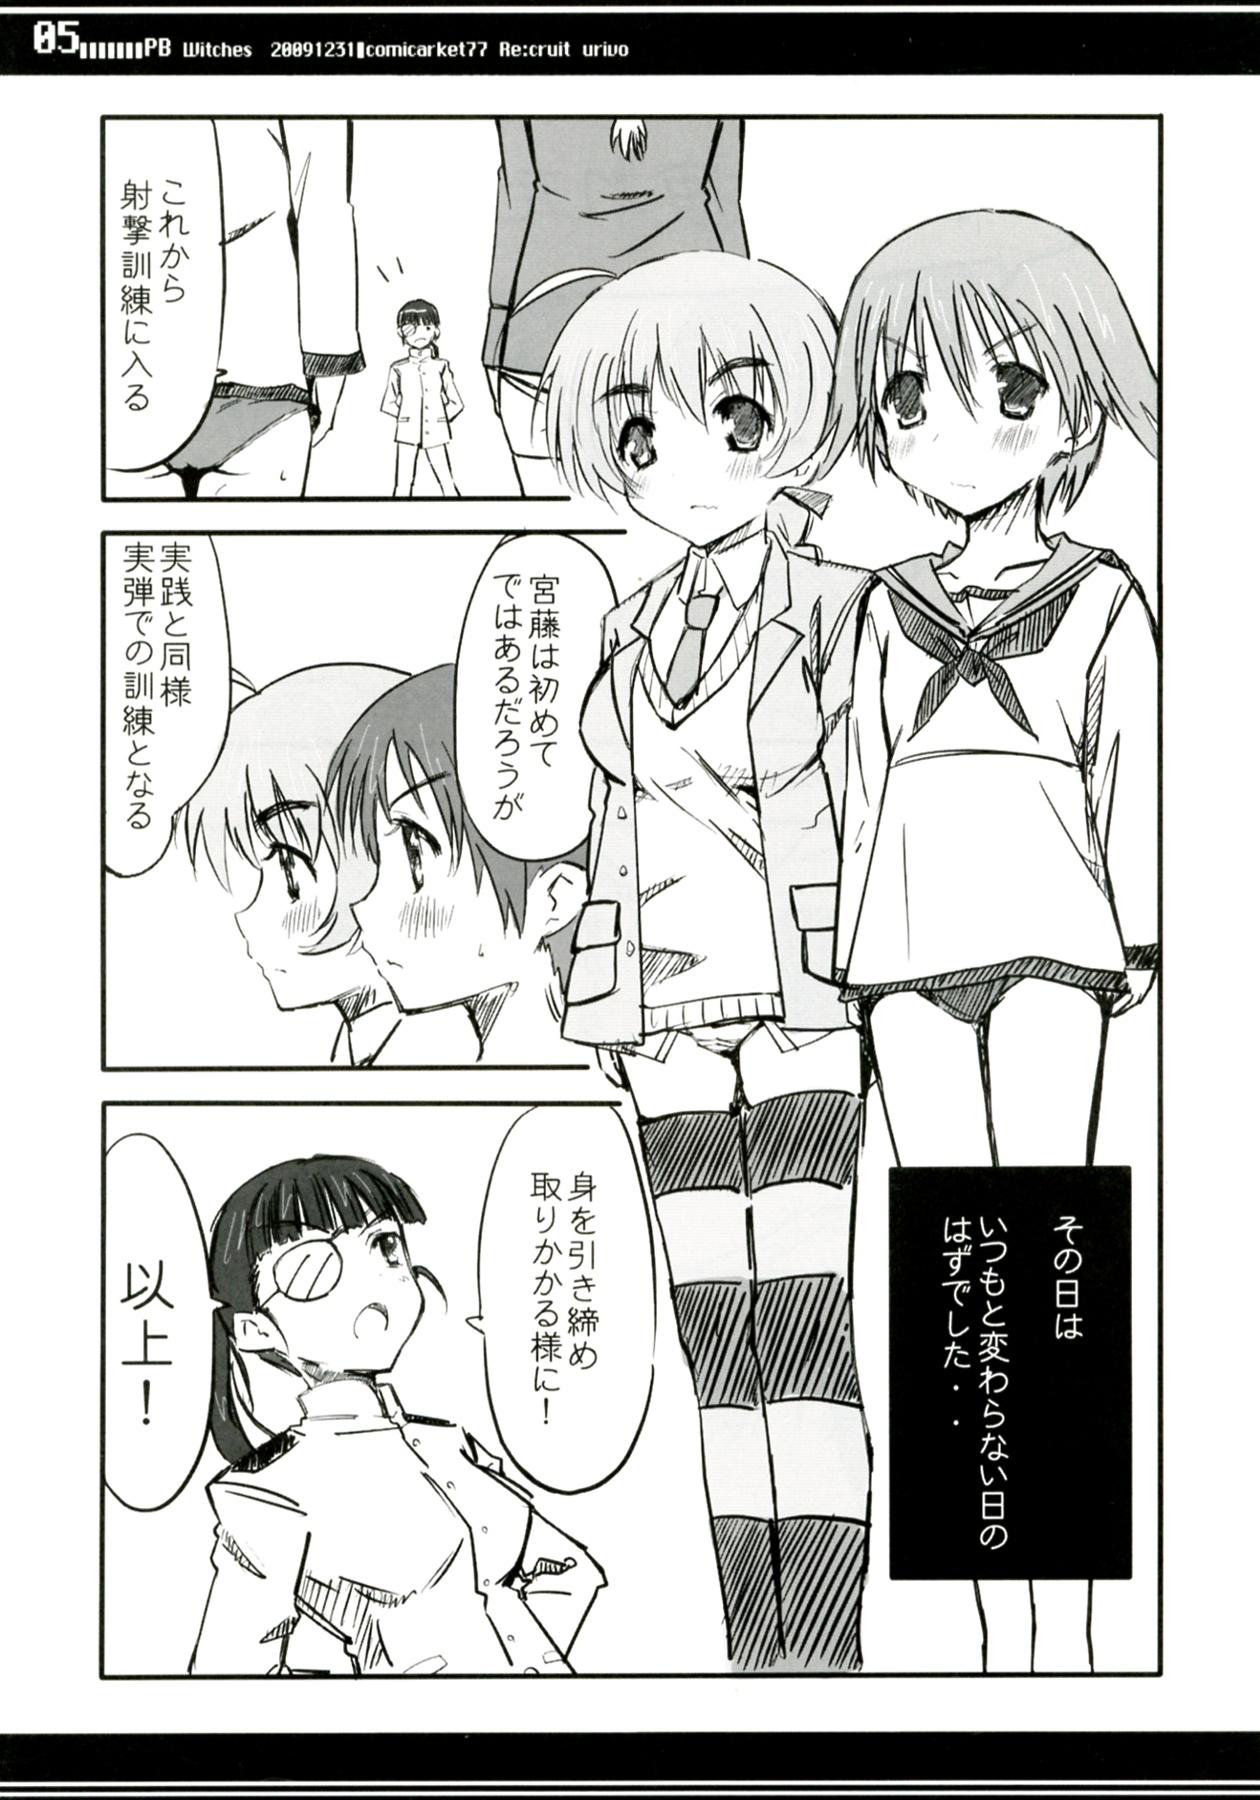 Amante PB Witches - Strike witches Blowing - Page 5